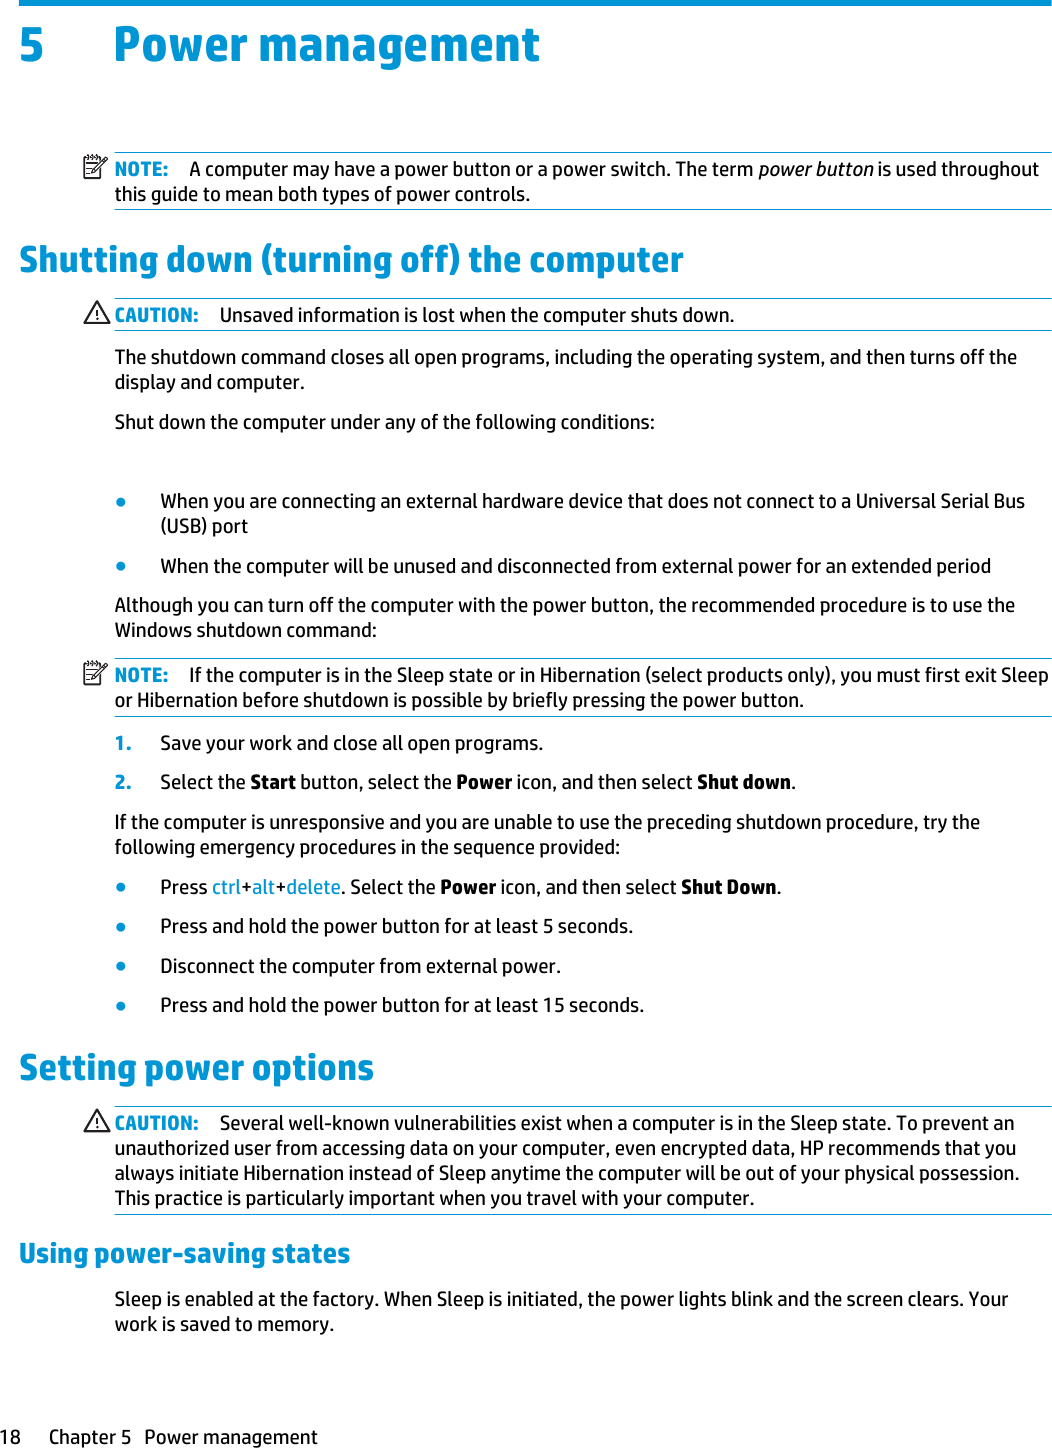 5 Power managementNOTE: A computer may have a power button or a power switch. The term power button is used throughout this guide to mean both types of power controls.Shutting down (turning off) the computerCAUTION: Unsaved information is lost when the computer shuts down.The shutdown command closes all open programs, including the operating system, and then turns off the display and computer.Shut down the computer under any of the following conditions:●When you need to replace the battery or access components inside the computer●When you are connecting an external hardware device that does not connect to a Universal Serial Bus (USB) port●When the computer will be unused and disconnected from external power for an extended periodAlthough you can turn off the computer with the power button, the recommended procedure is to use the Windows shutdown command:NOTE: If the computer is in the Sleep state or in Hibernation (select products only), you must first exit Sleep or Hibernation before shutdown is possible by briefly pressing the power button.1. Save your work and close all open programs.2. Select the Start button, select the Power icon, and then select Shut down.If the computer is unresponsive and you are unable to use the preceding shutdown procedure, try the following emergency procedures in the sequence provided:●Press ctrl+alt+delete. Select the Power icon, and then select Shut Down.●Press and hold the power button for at least 5 seconds.●Disconnect the computer from external power.●Press and hold the power button for at least 15 seconds.Setting power optionsCAUTION: Several well-known vulnerabilities exist when a computer is in the Sleep state. To prevent an unauthorized user from accessing data on your computer, even encrypted data, HP recommends that you always initiate Hibernation instead of Sleep anytime the computer will be out of your physical possession. This practice is particularly important when you travel with your computer.Using power-saving statesSleep is enabled at the factory. When Sleep is initiated, the power lights blink and the screen clears. Your work is saved to memory. 18 Chapter 5   Power management